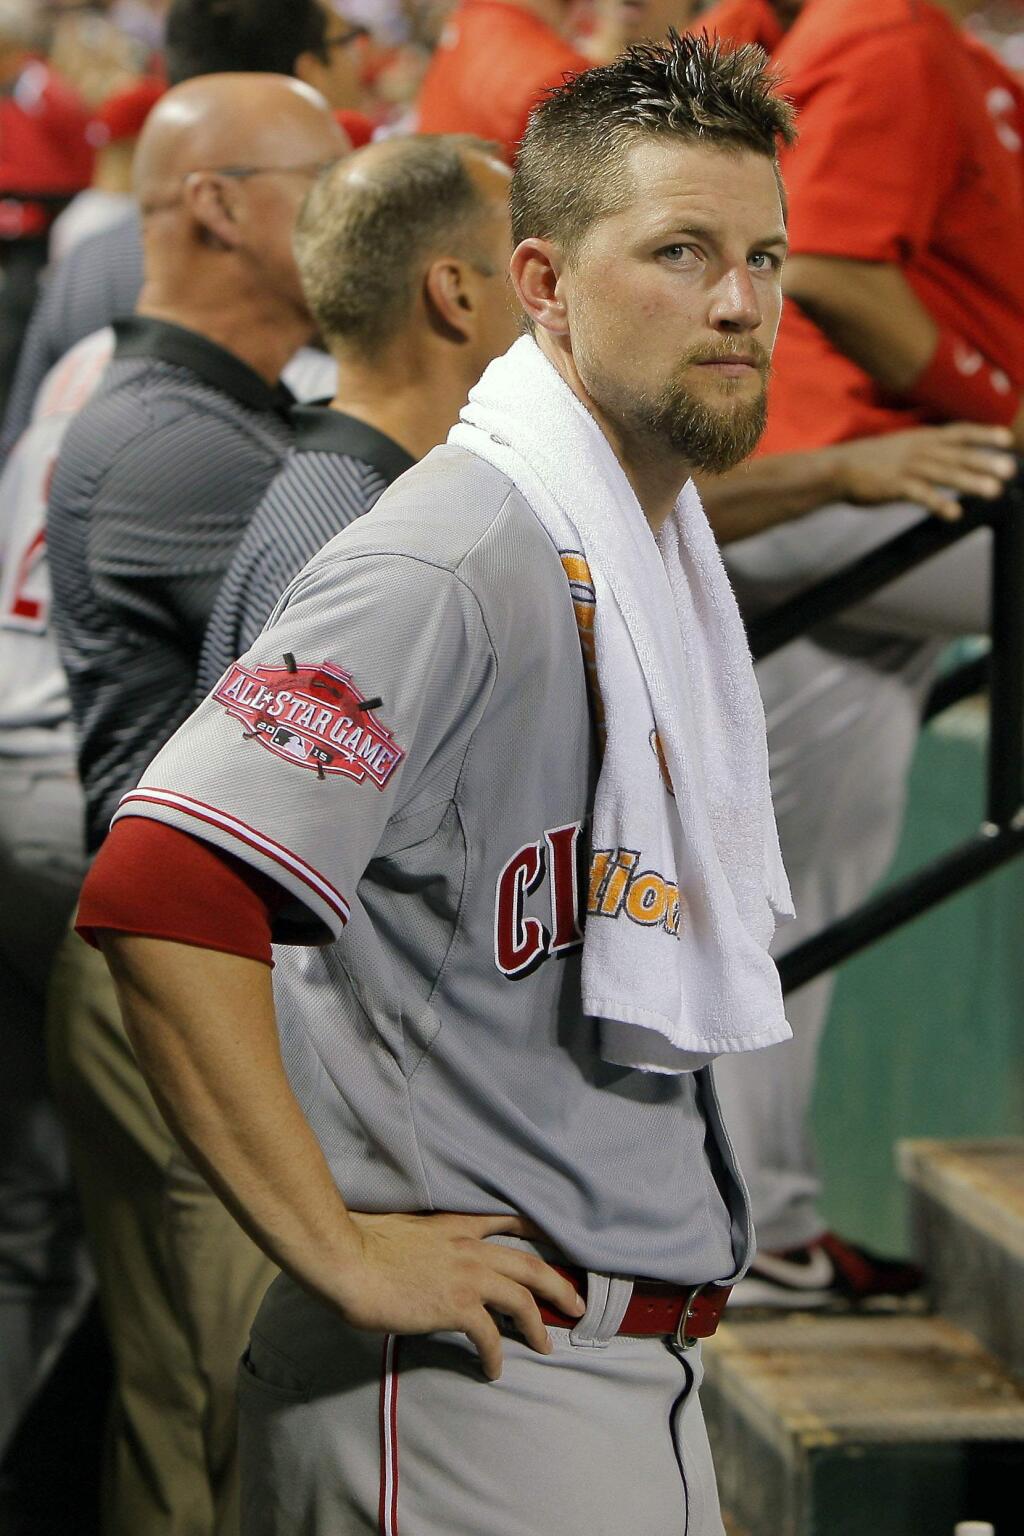 Cincinnati Reds starting pitcher Mike Leake watches from the dugout during the ninth inning of a game against the St. Louis Cardinals Tuesday, July 28, 2015, in St. Louis. (AP Photo/Scott Kane)